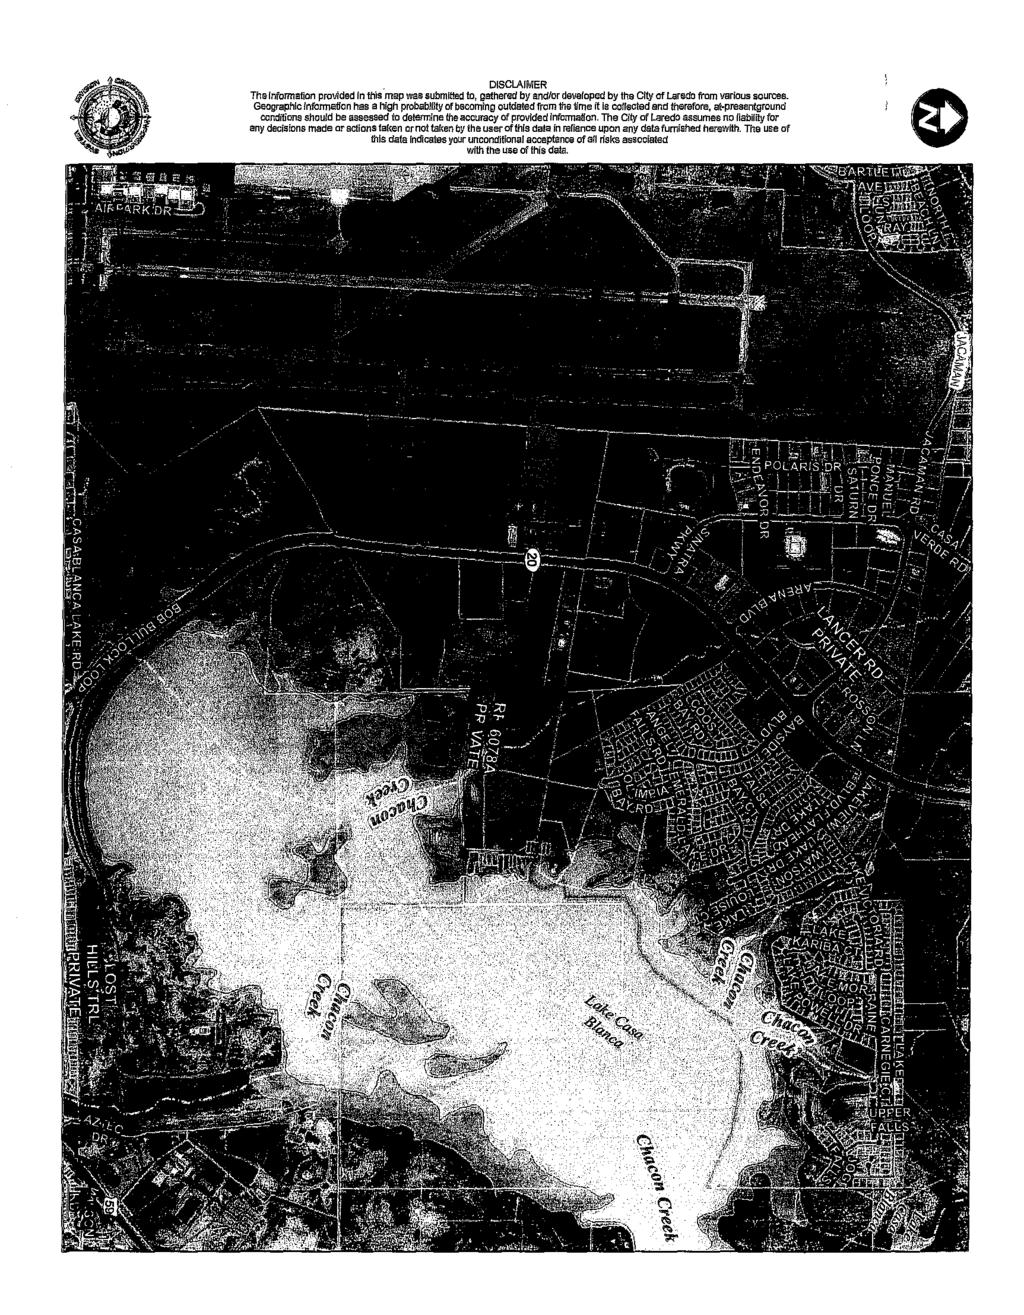 . DSCLAMER Tllelnformalion provided n this map was submitted to, gathered by and/or developed by tile City of Laredo from various sources.